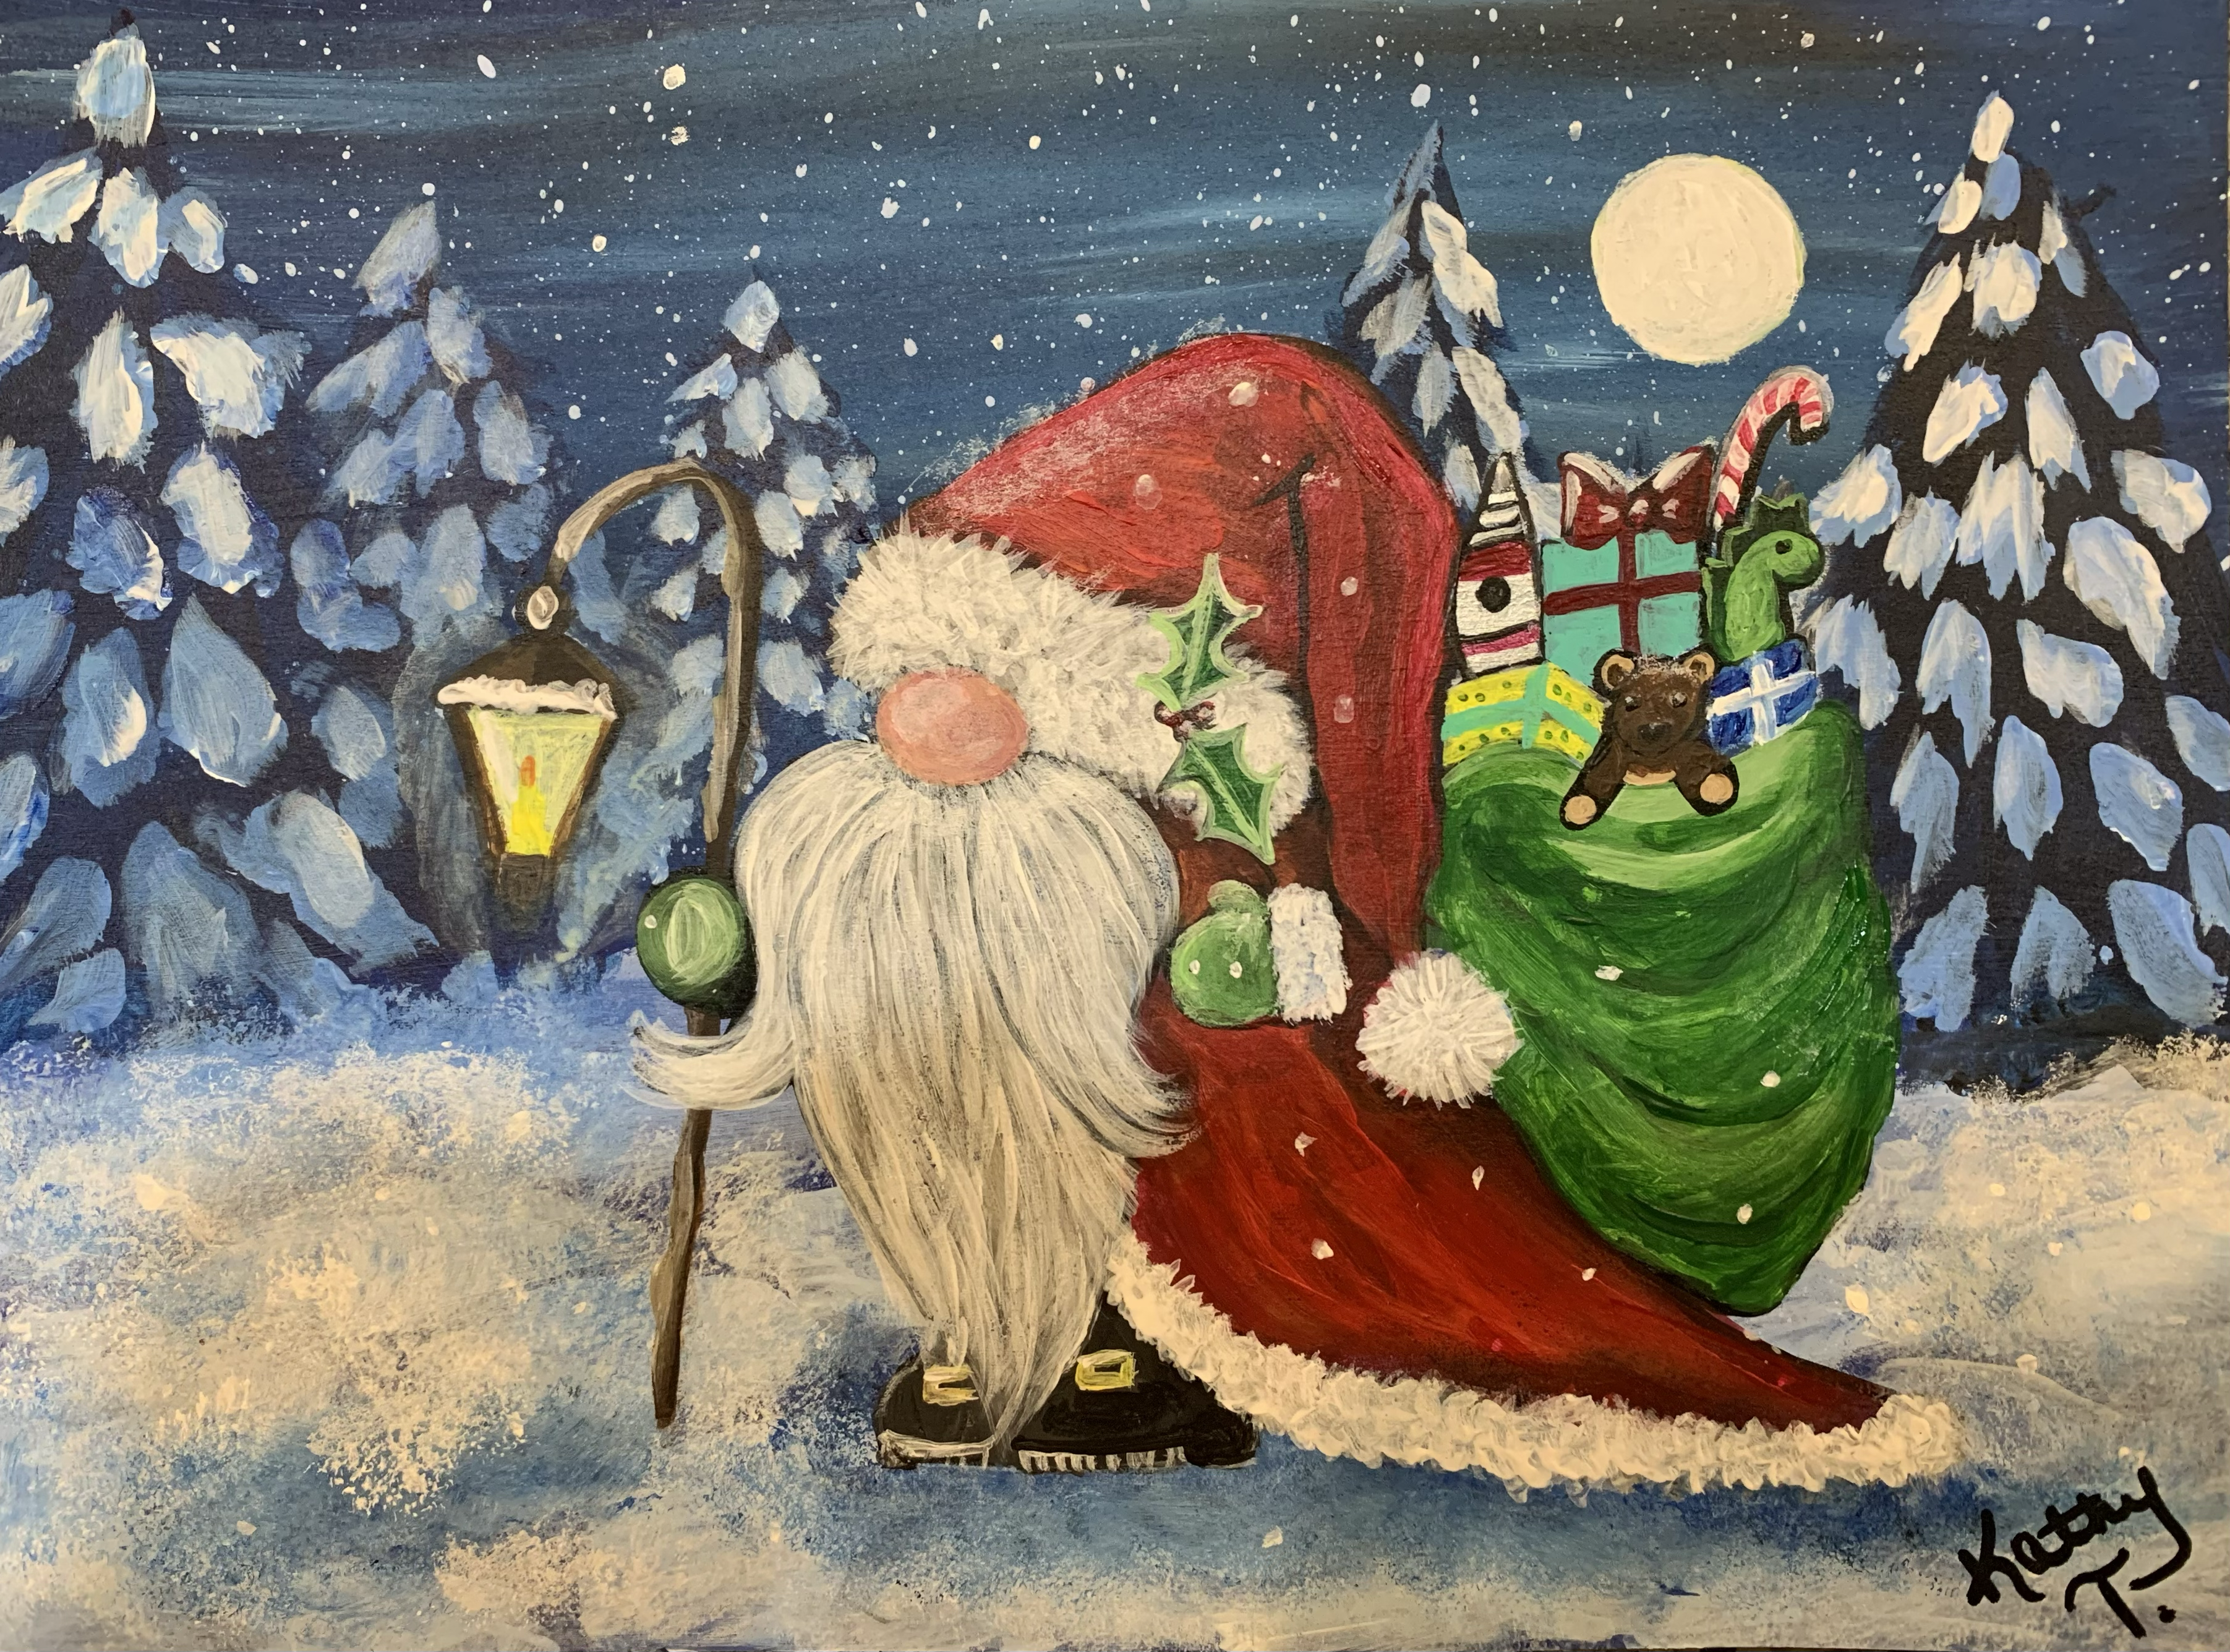 Santa—if santa were a gnome—with his lantern and sack of toys